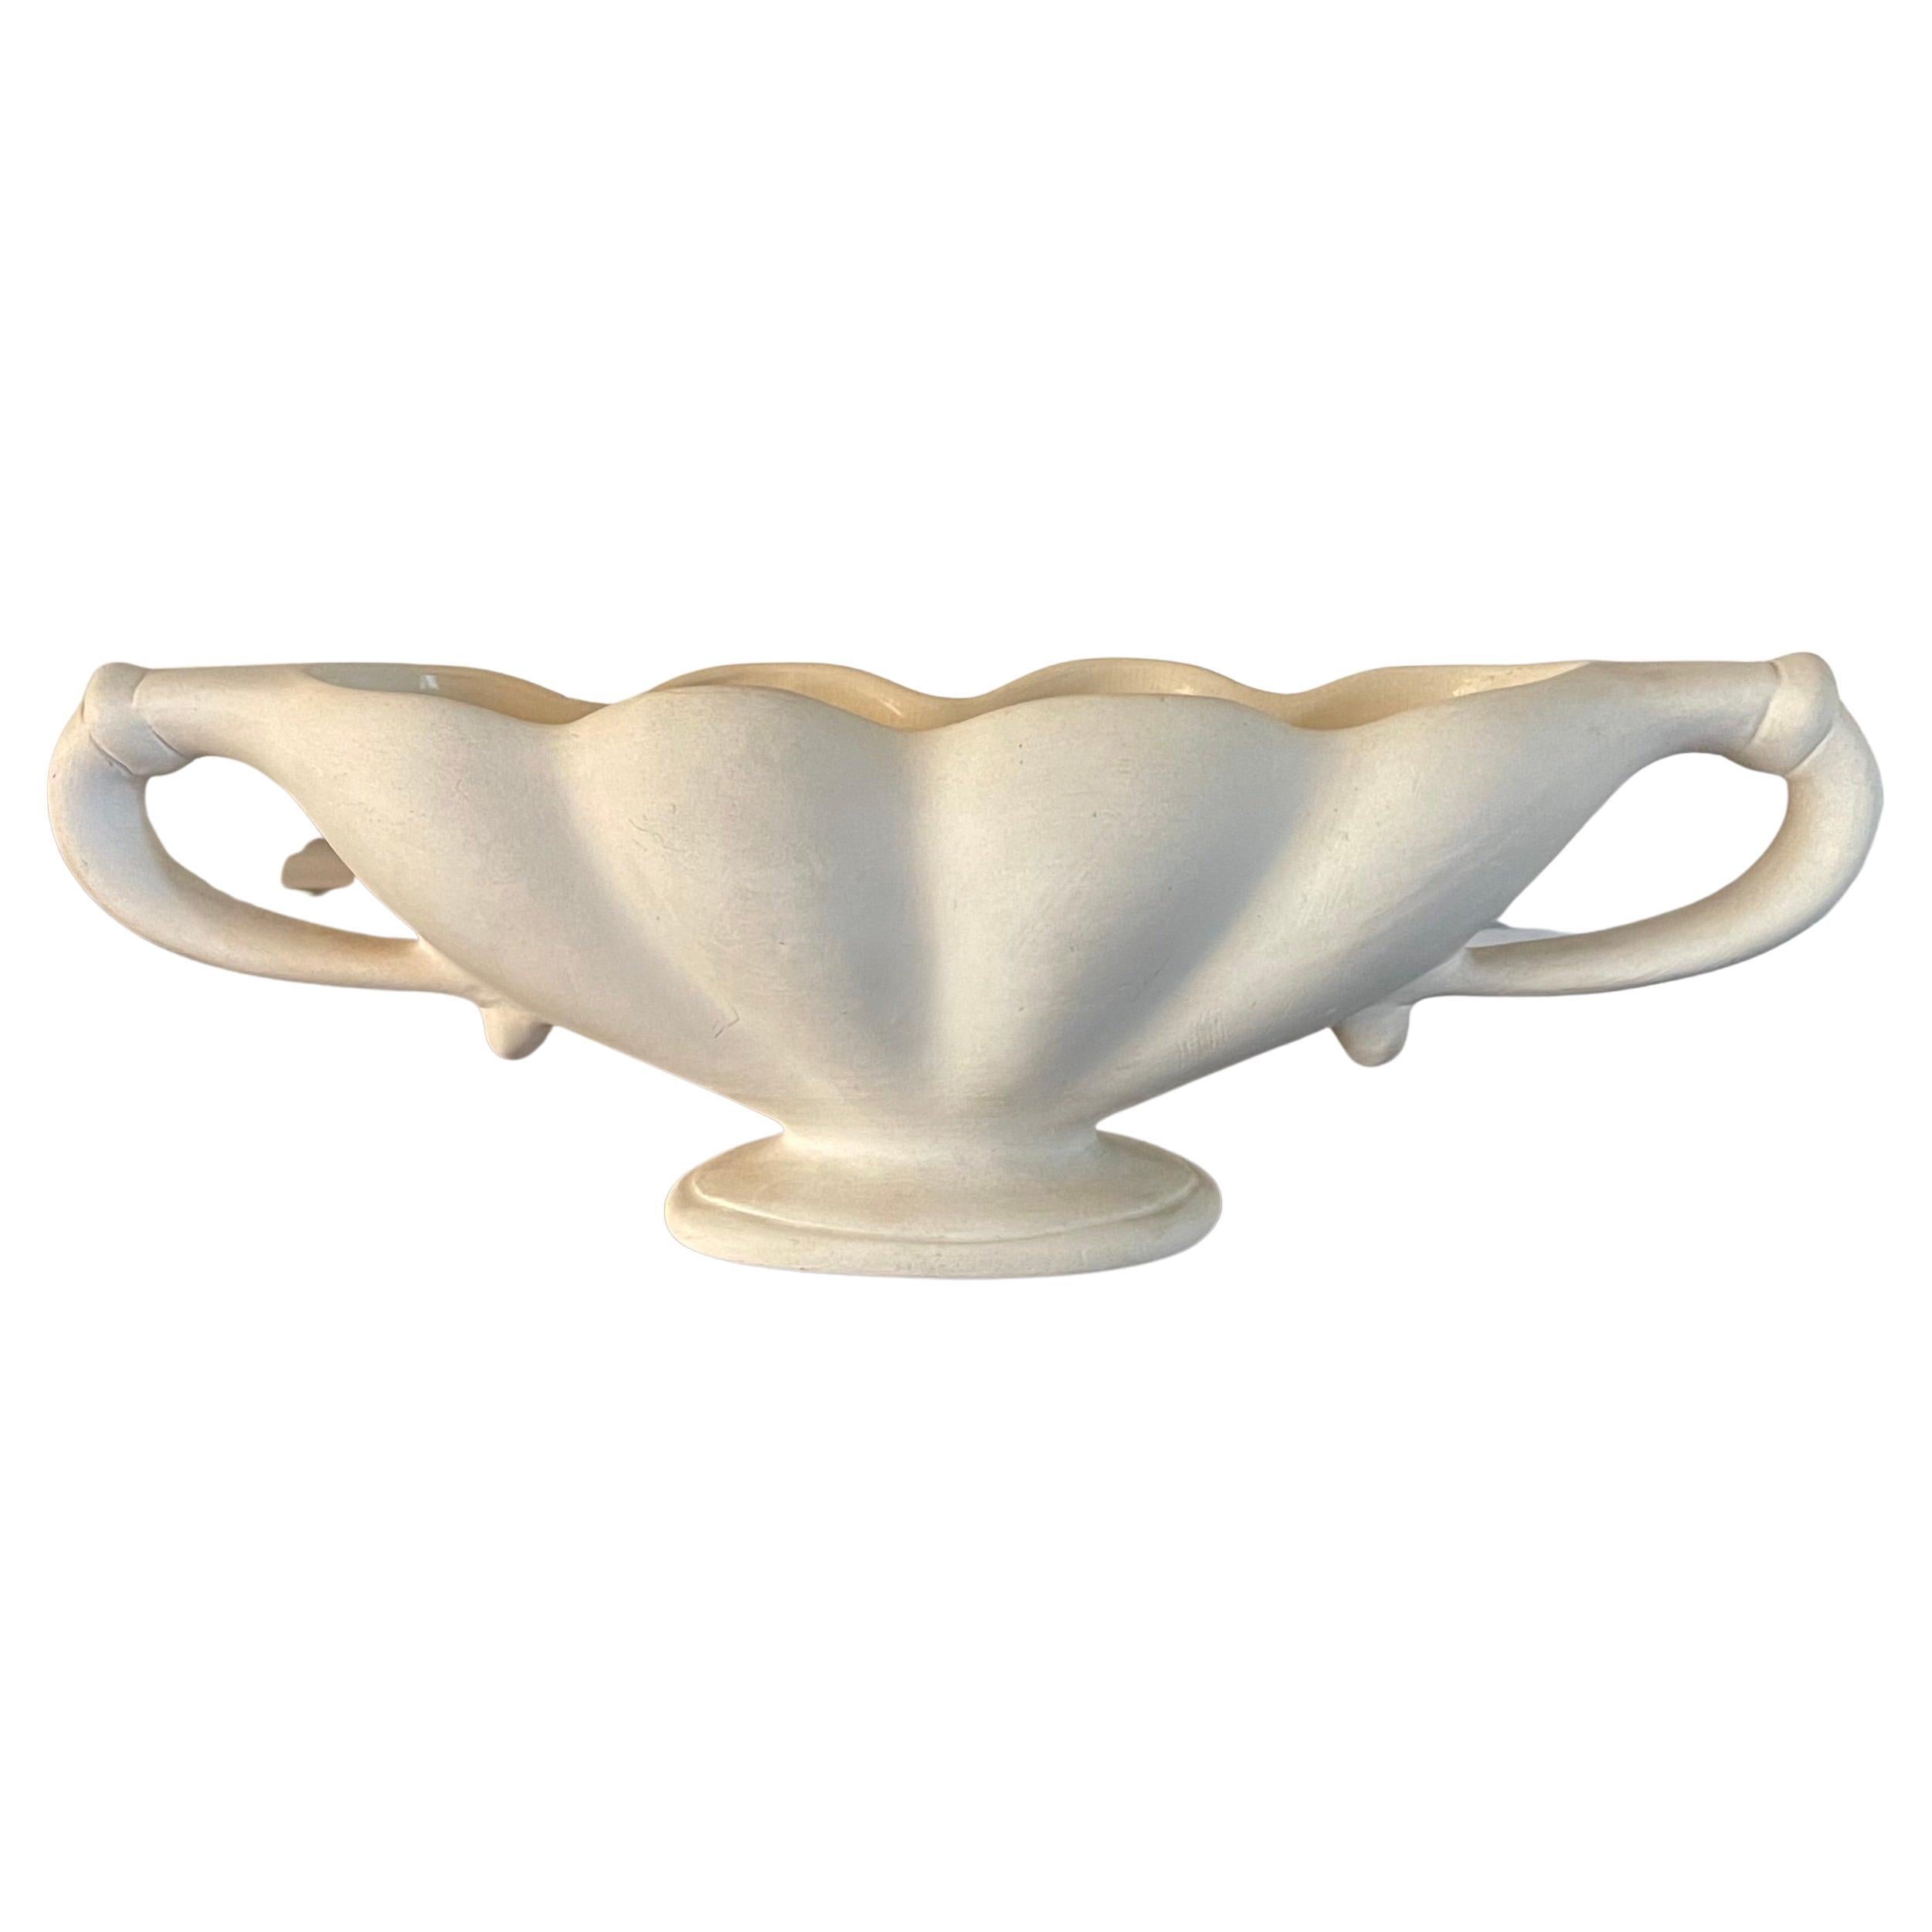 Constance Spry for Fulham Pottery Scalloped Vase, circa 1930s